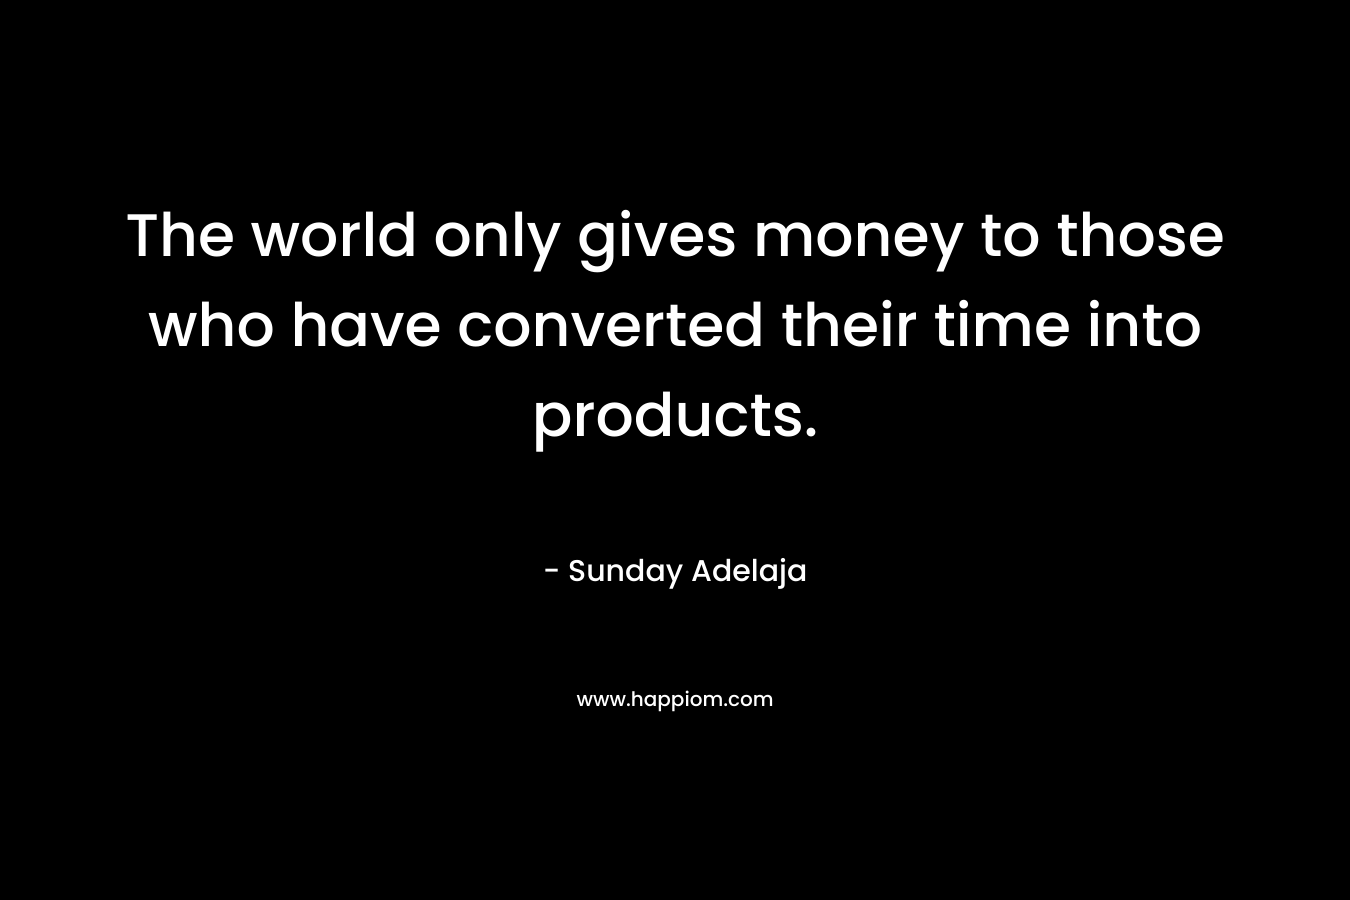 The world only gives money to those who have converted their time into products.